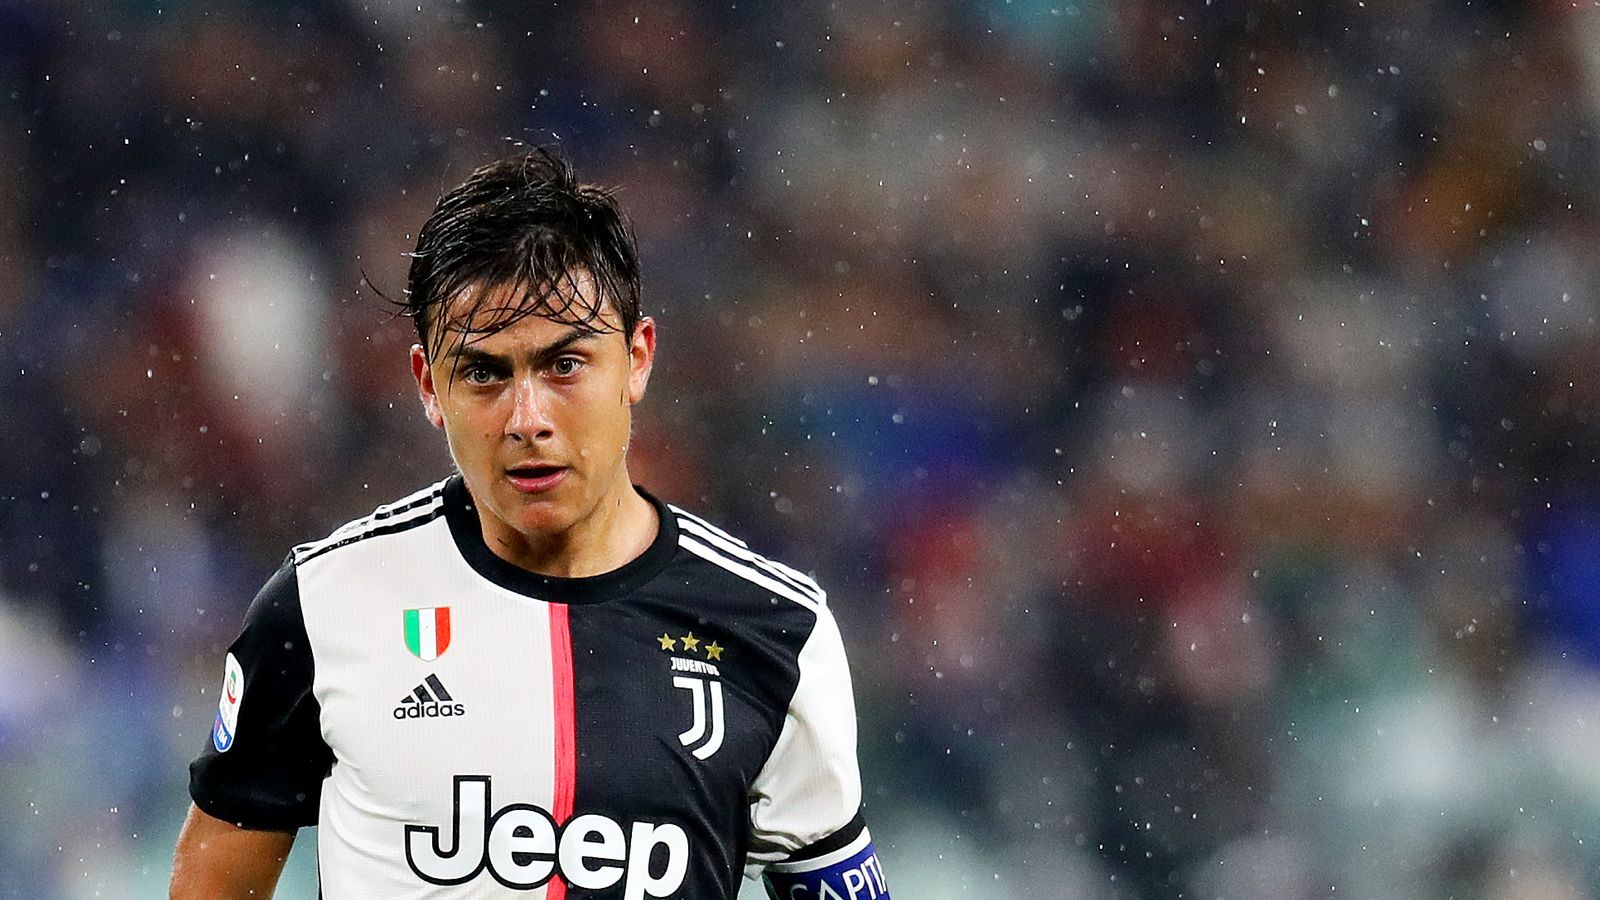 Dybala asked the players to unite against racism  